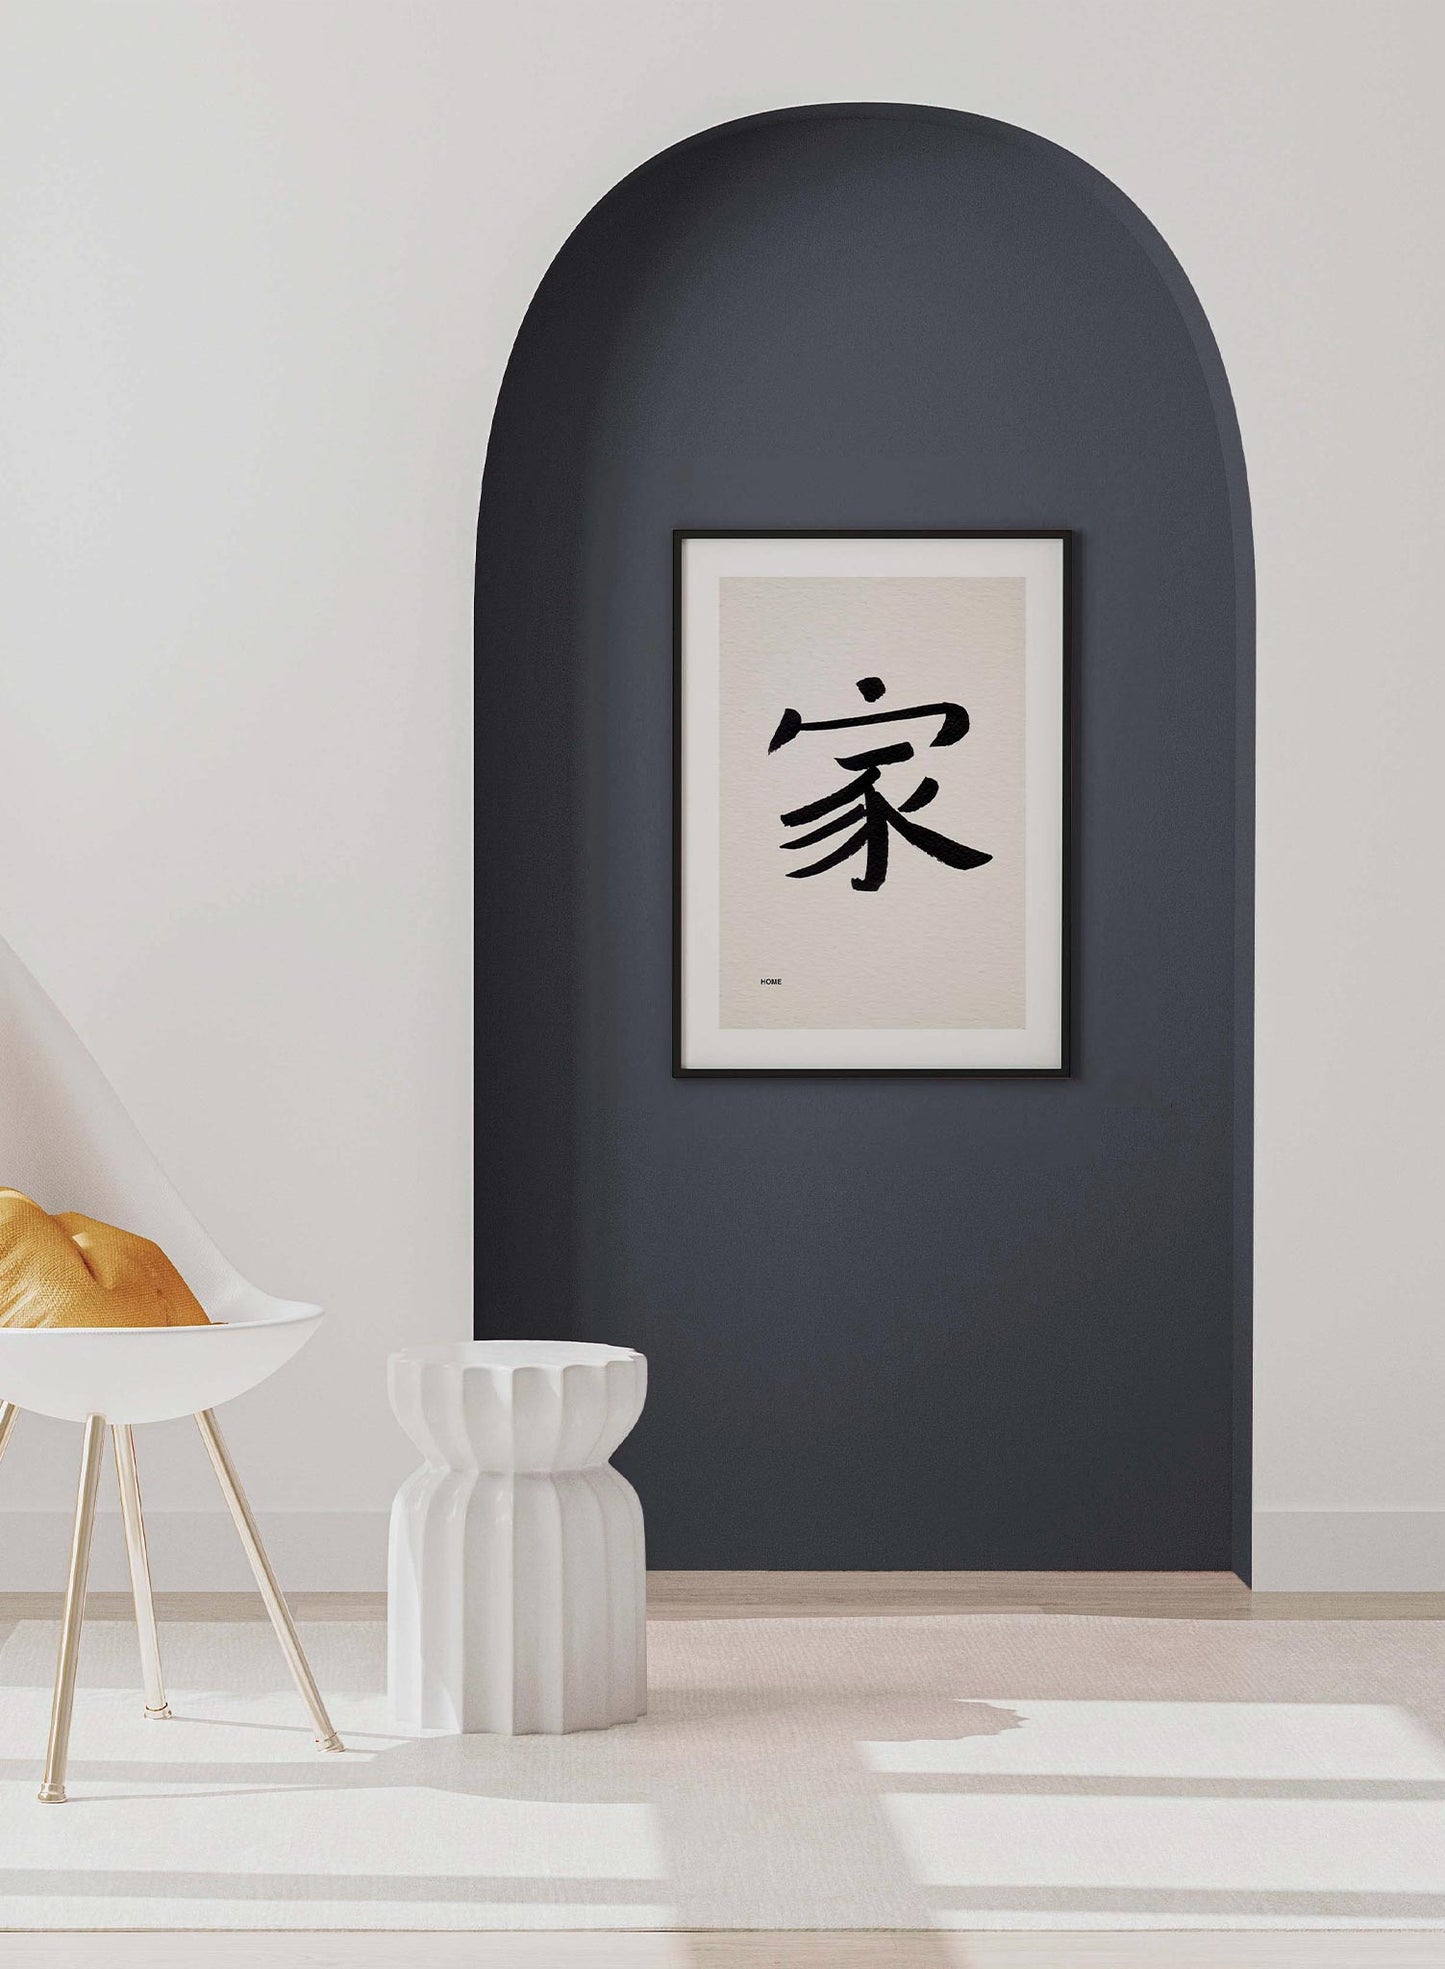 Home in Japanese is a minimalist typography by Opposite Wall of the Japanese word "Home" written in ink.